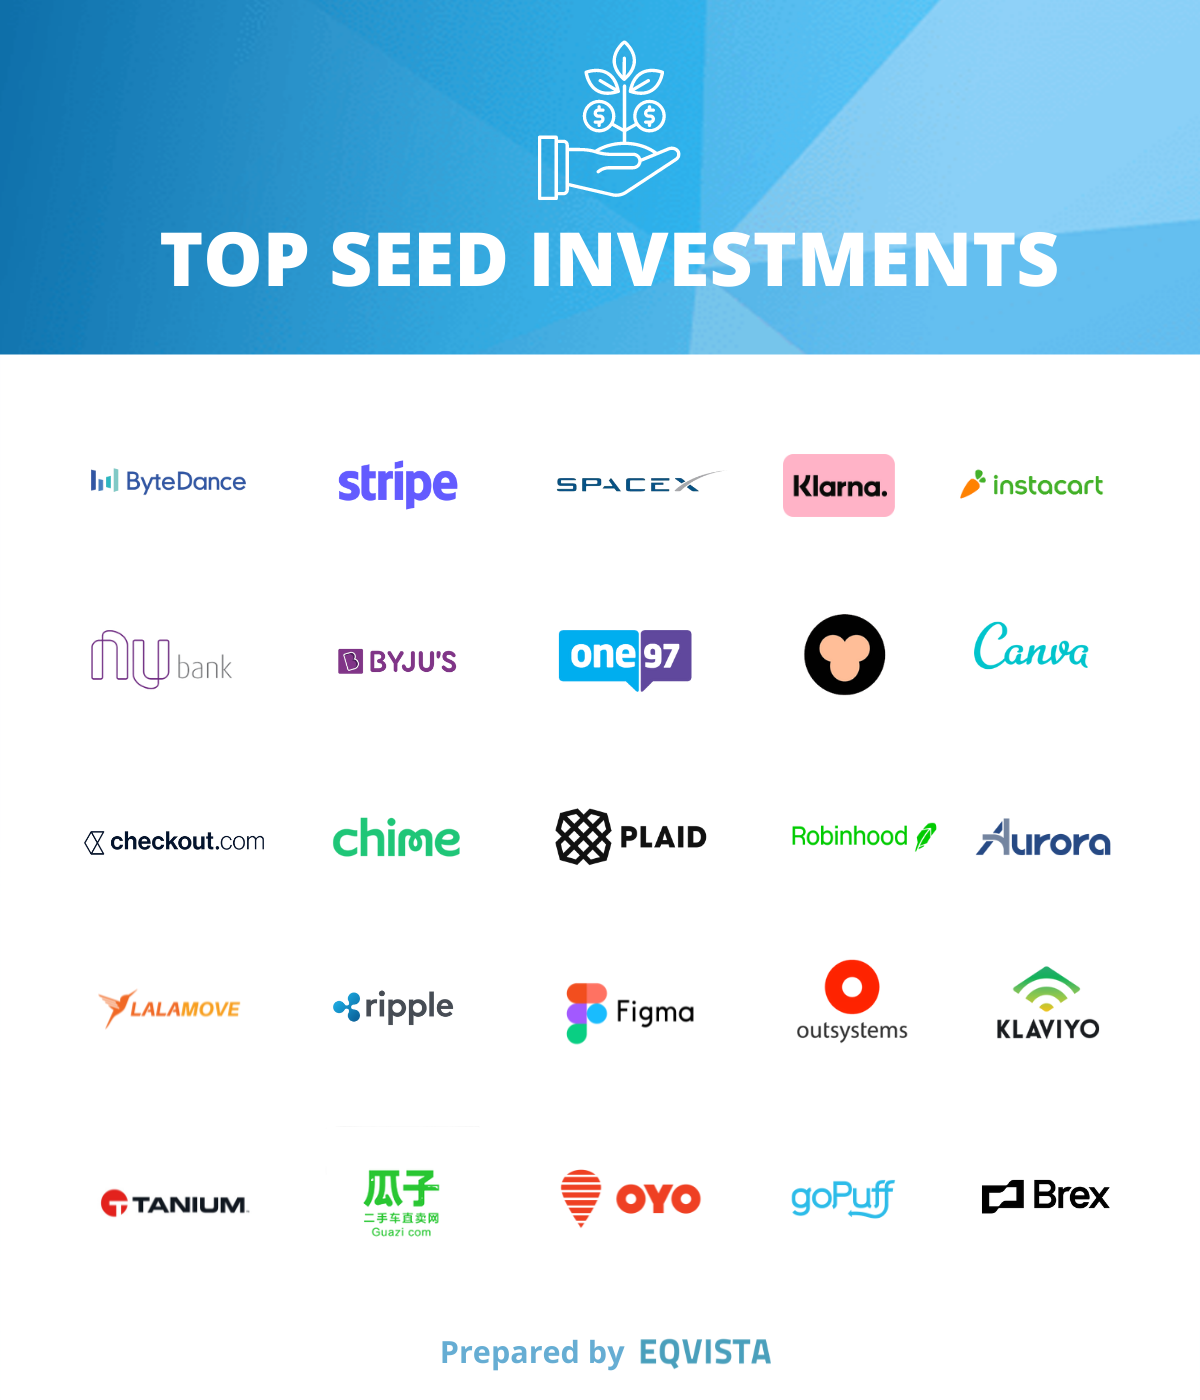 Top seed investments 